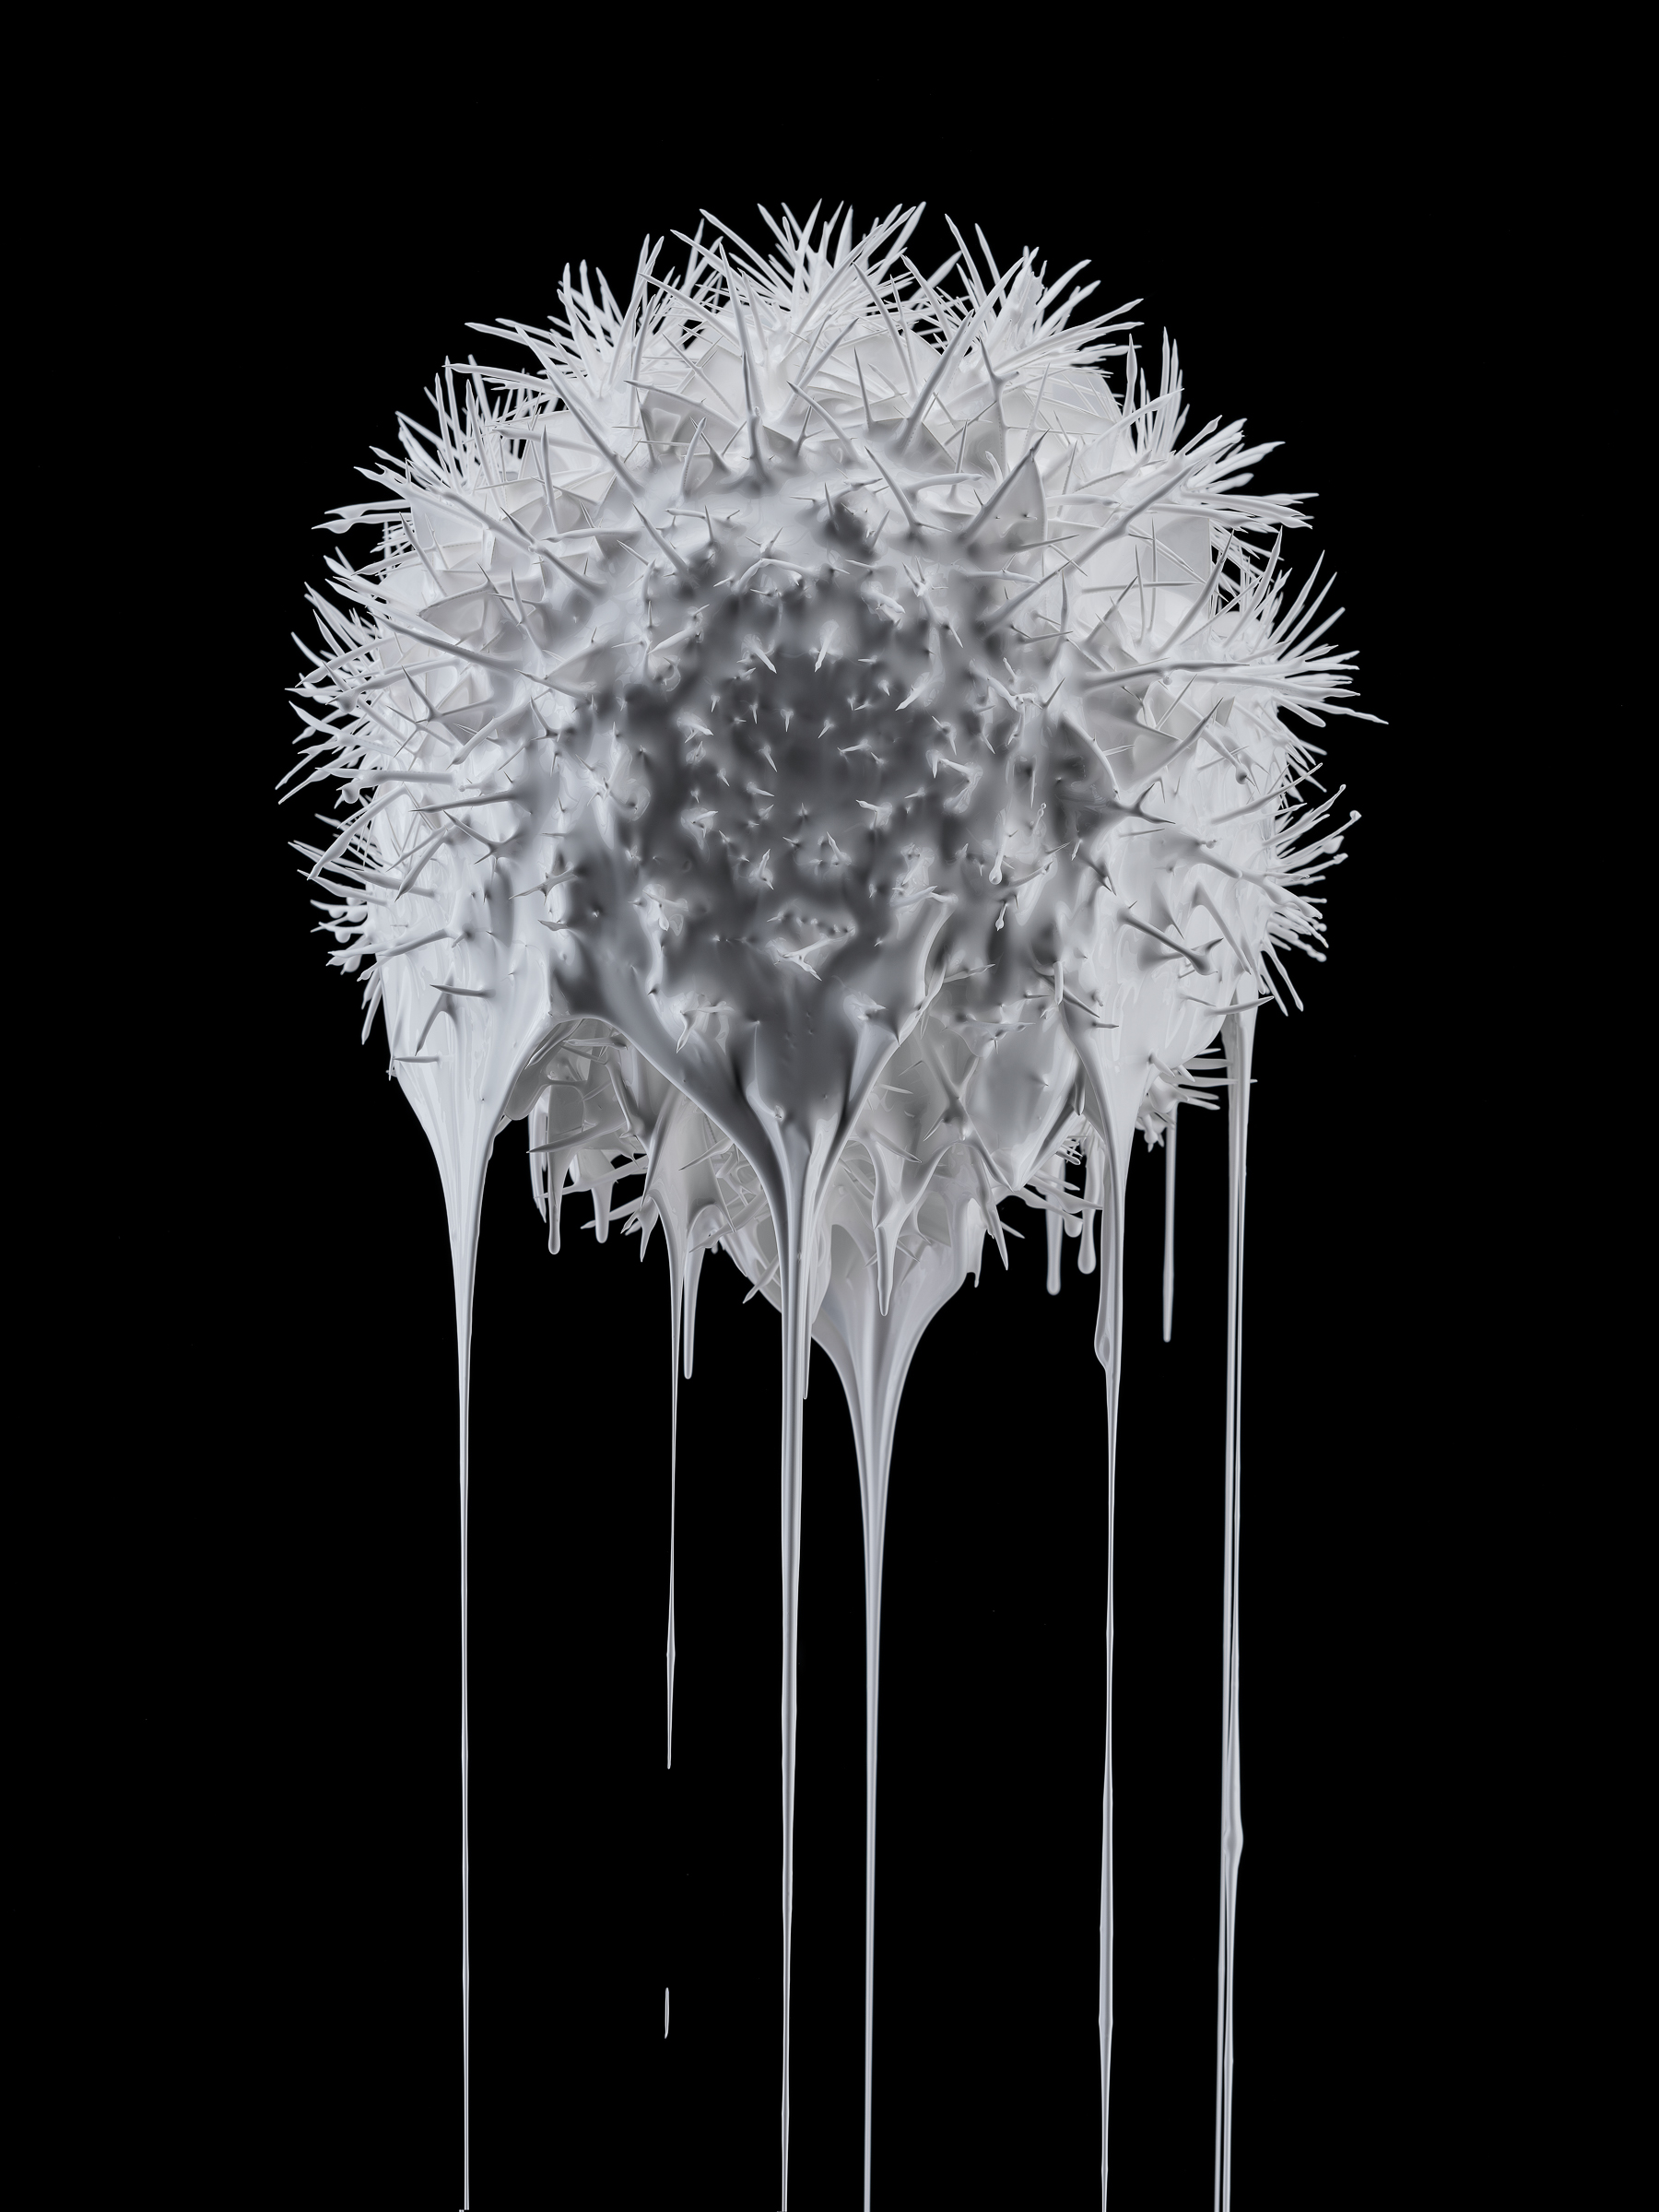 spiky plant dripping paint art photo